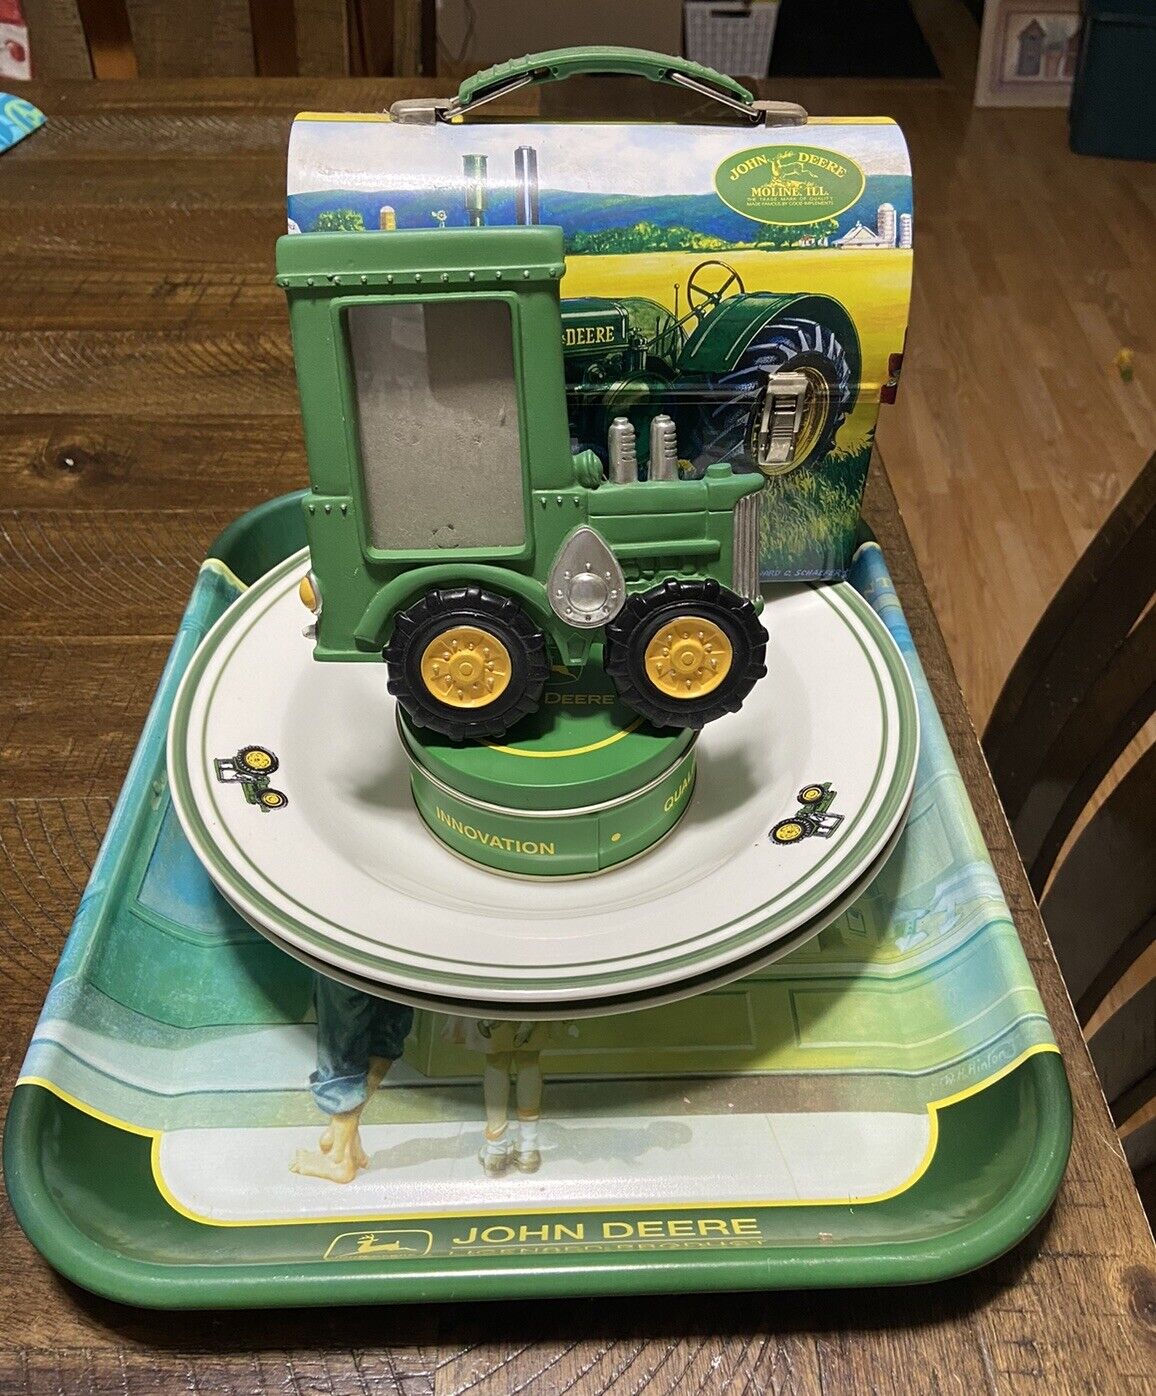 Lot of John Deere Tray, Coasters, Frame, 2 Bowls and Small Lunchbox